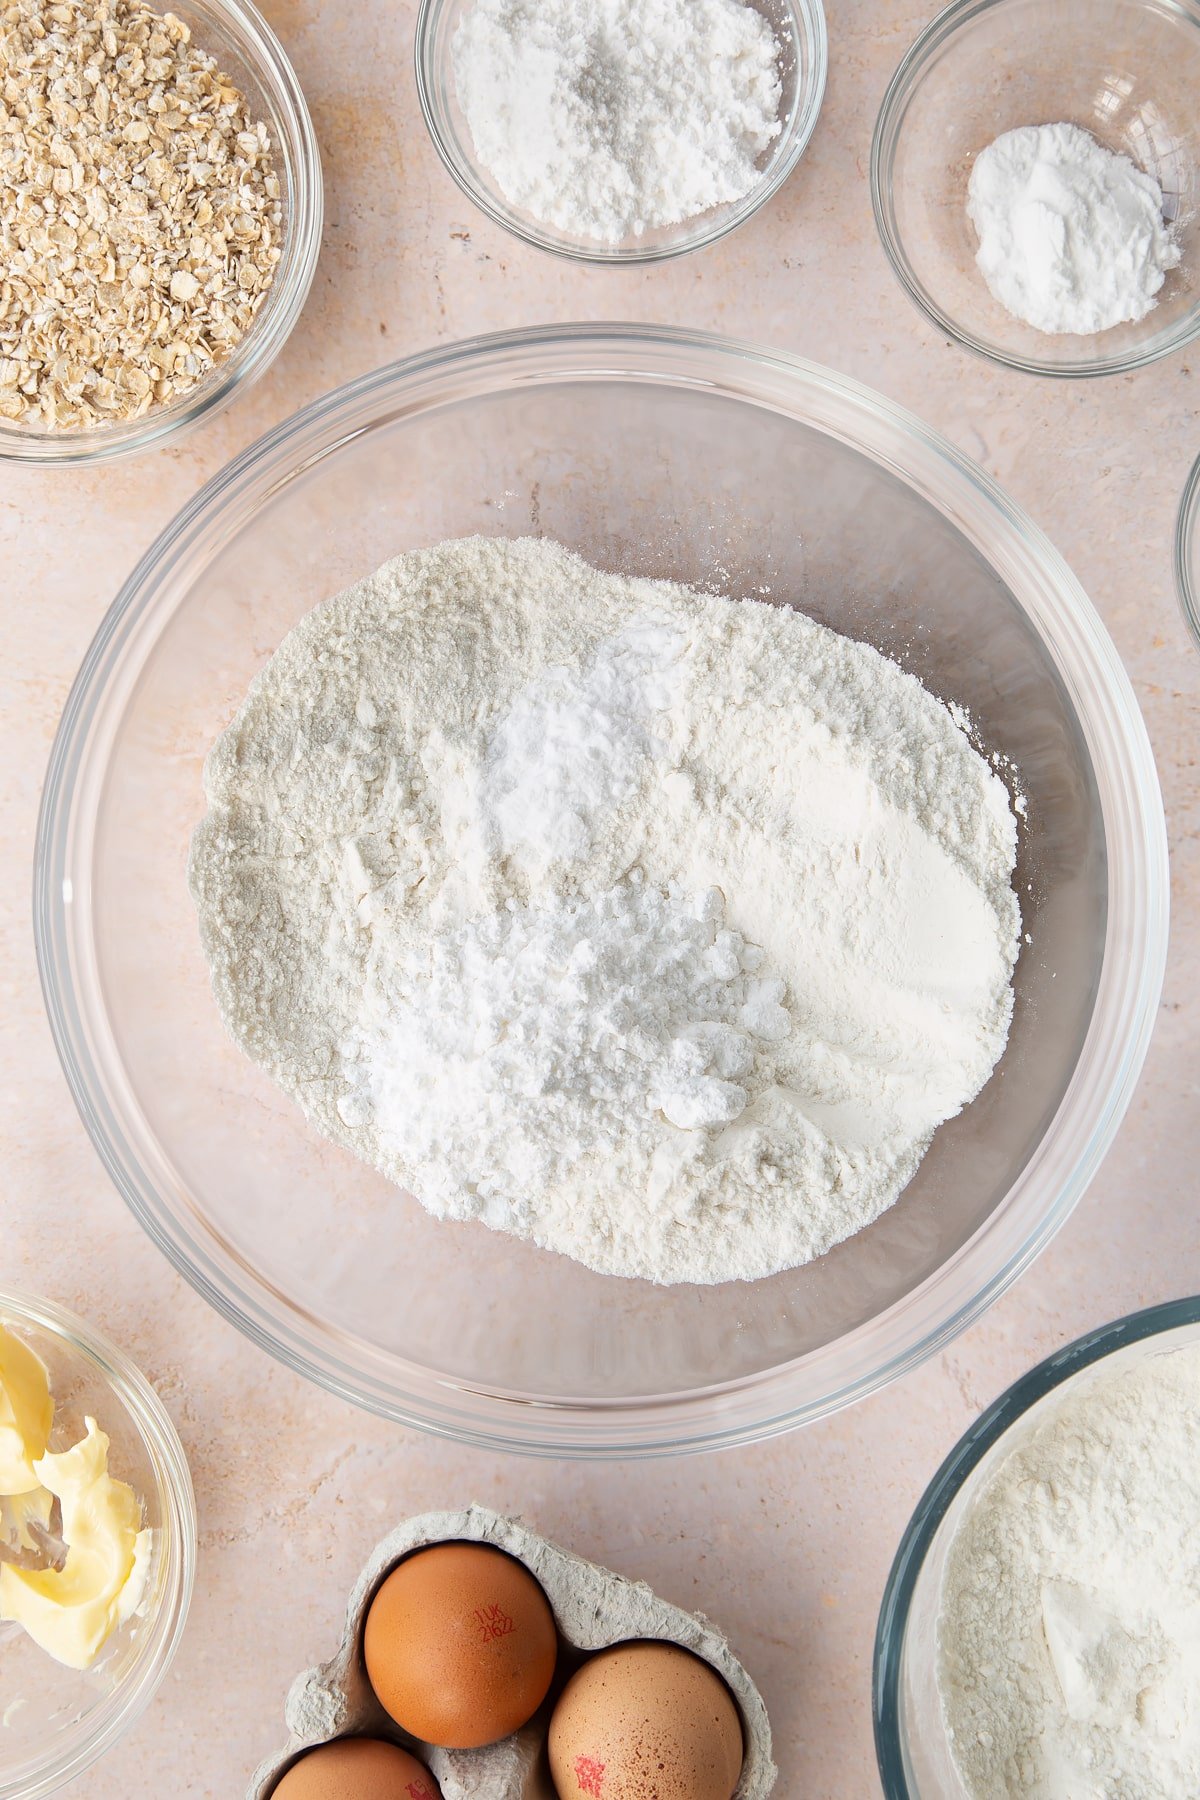 Flour, salt, bicarbonate of soda and icing sugar in a bowl. Ingredients to make gluten free crepes surround the bowl.